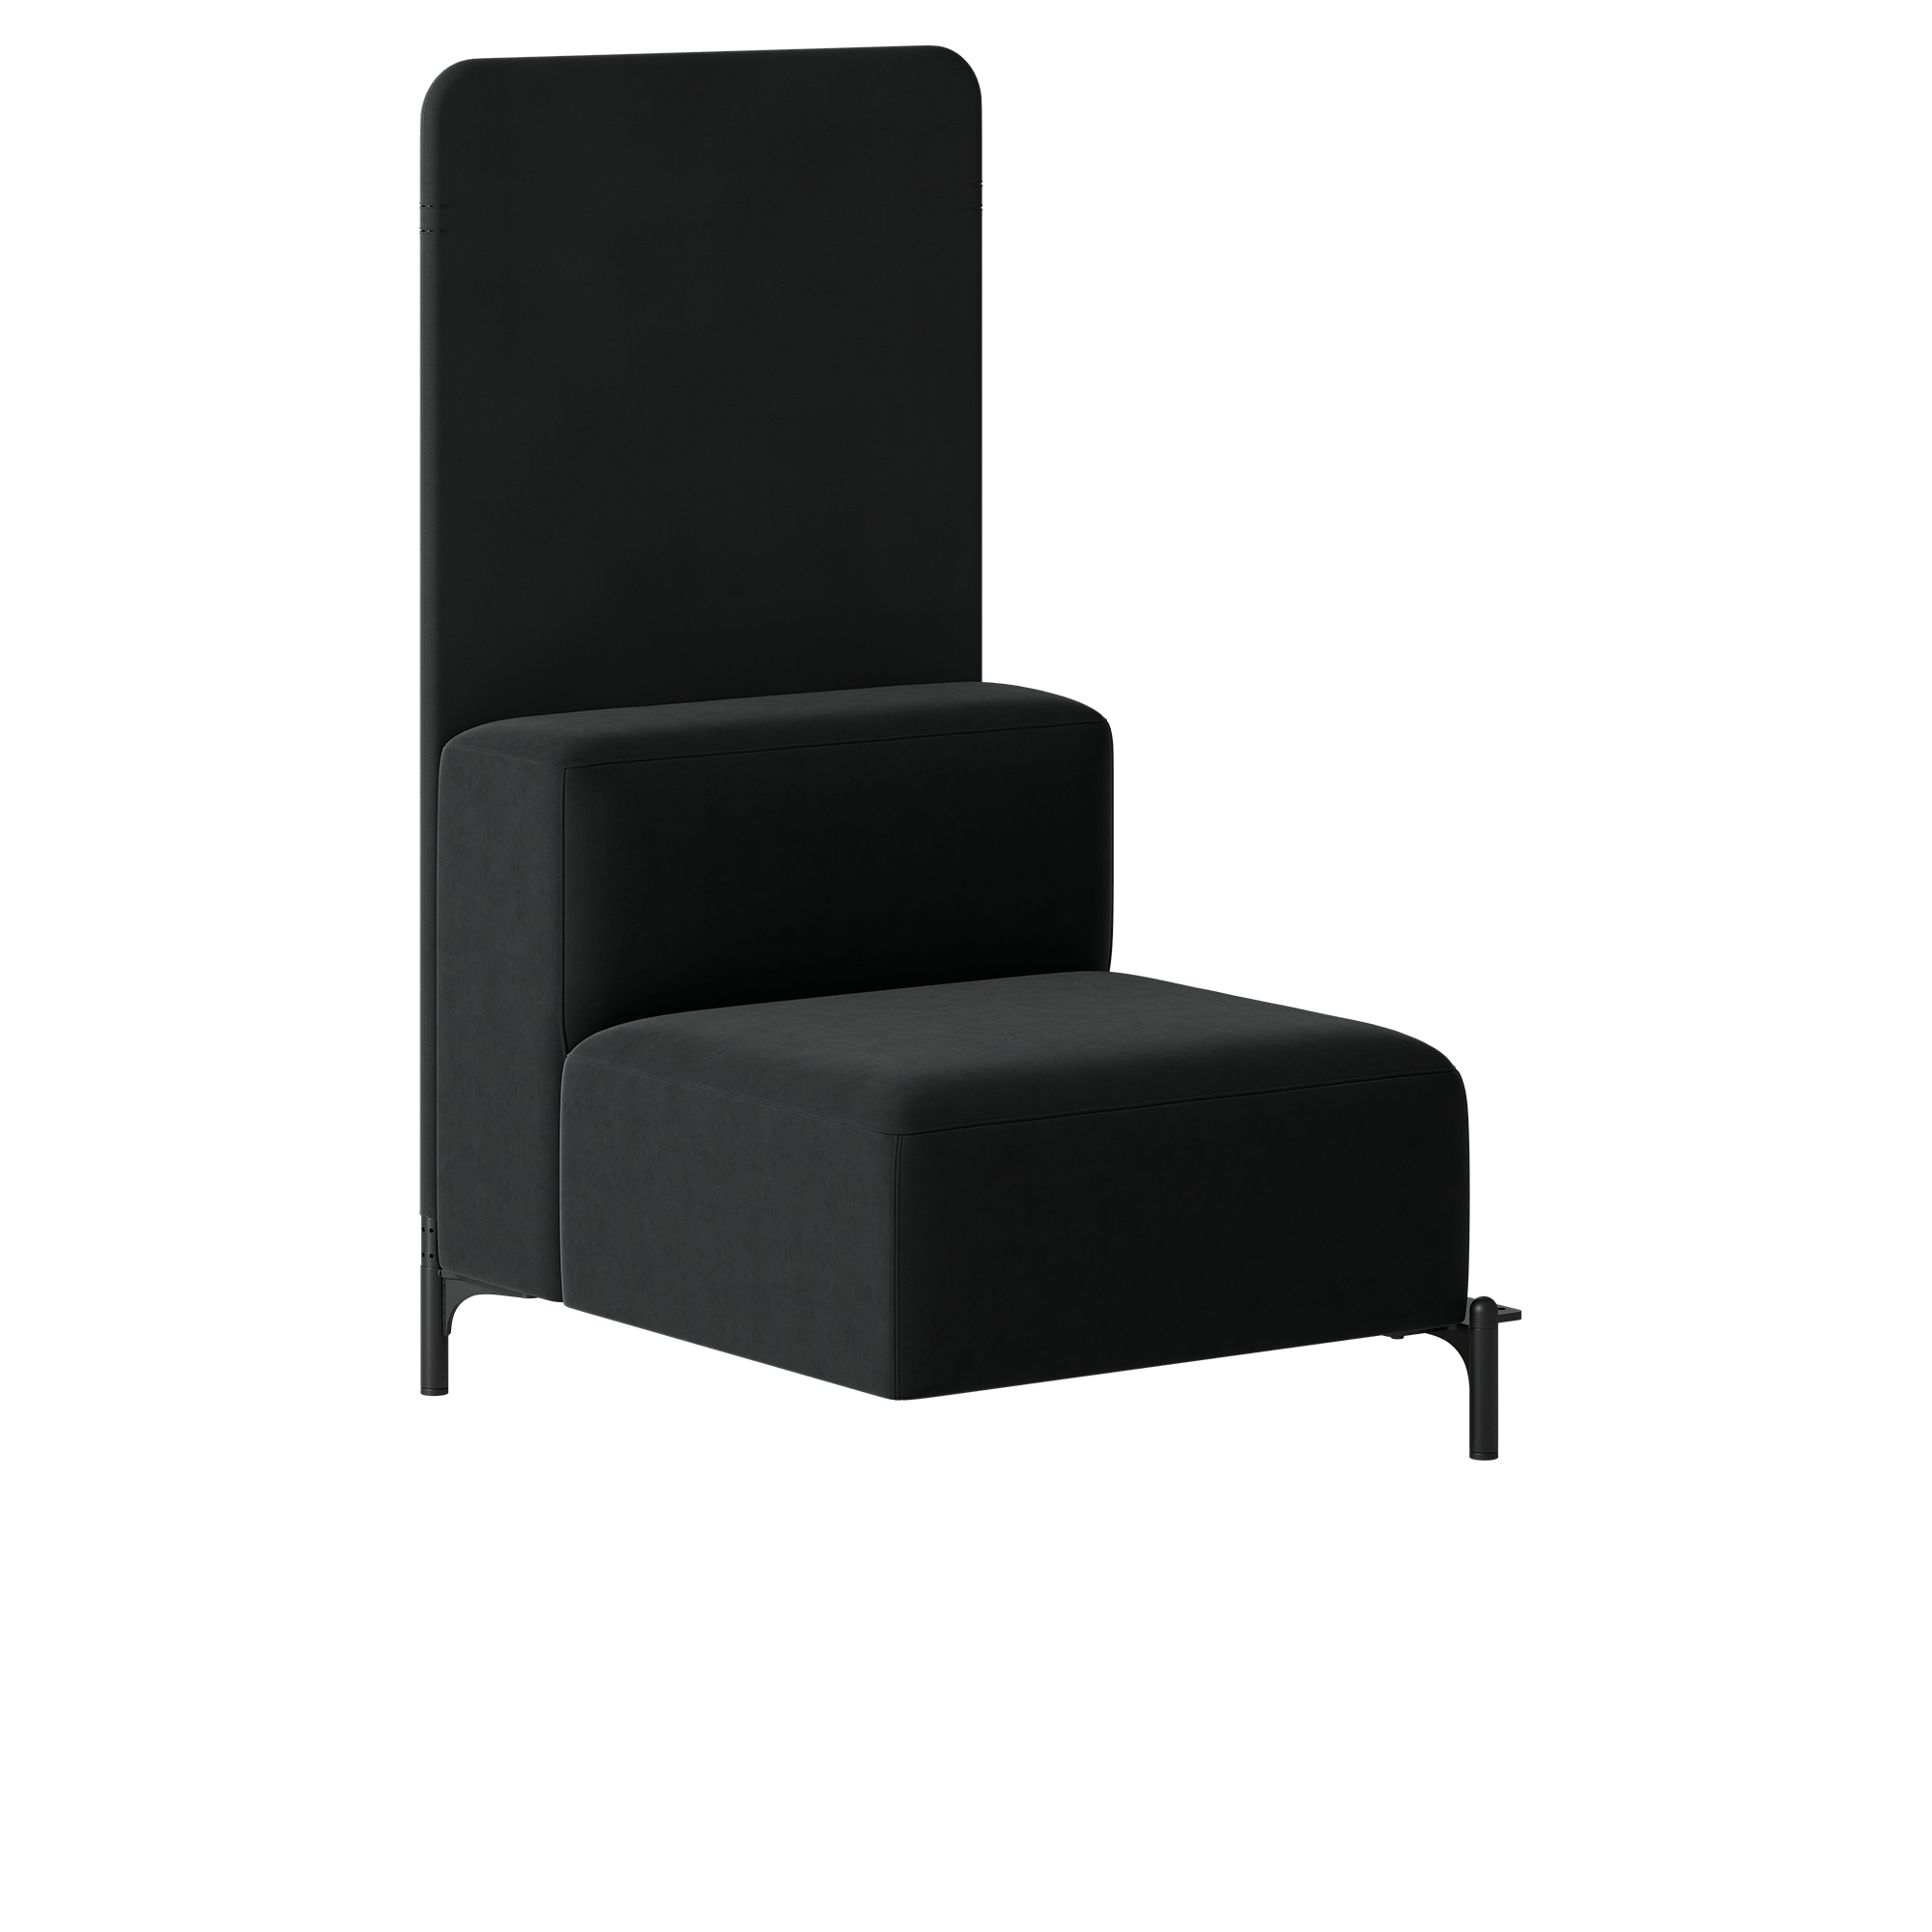 A black lounge chair with back panel